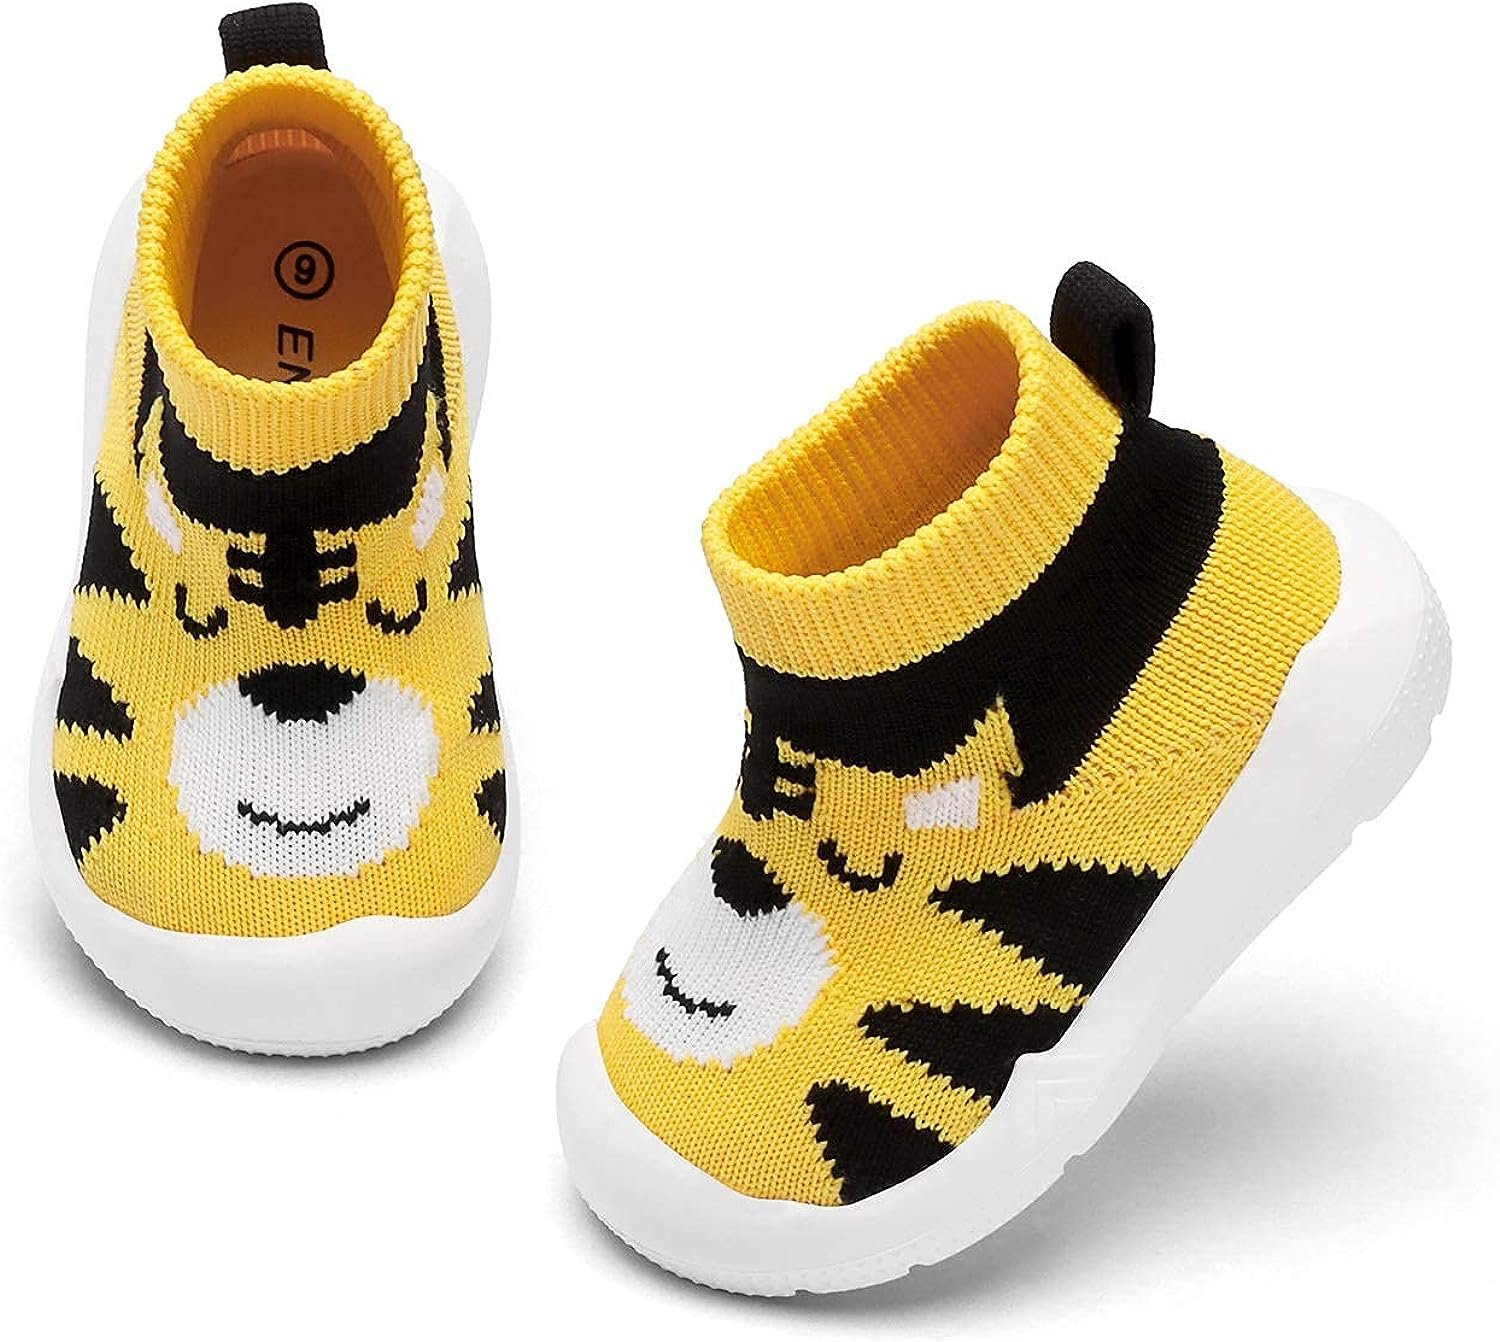 Baby Shoes Boys Girls Breathable Walking Sock Infant Shoes Baby First Walking Shoes Non-Skid Slipper Shoes with Soft Rubber Sole Toddle Sneaker